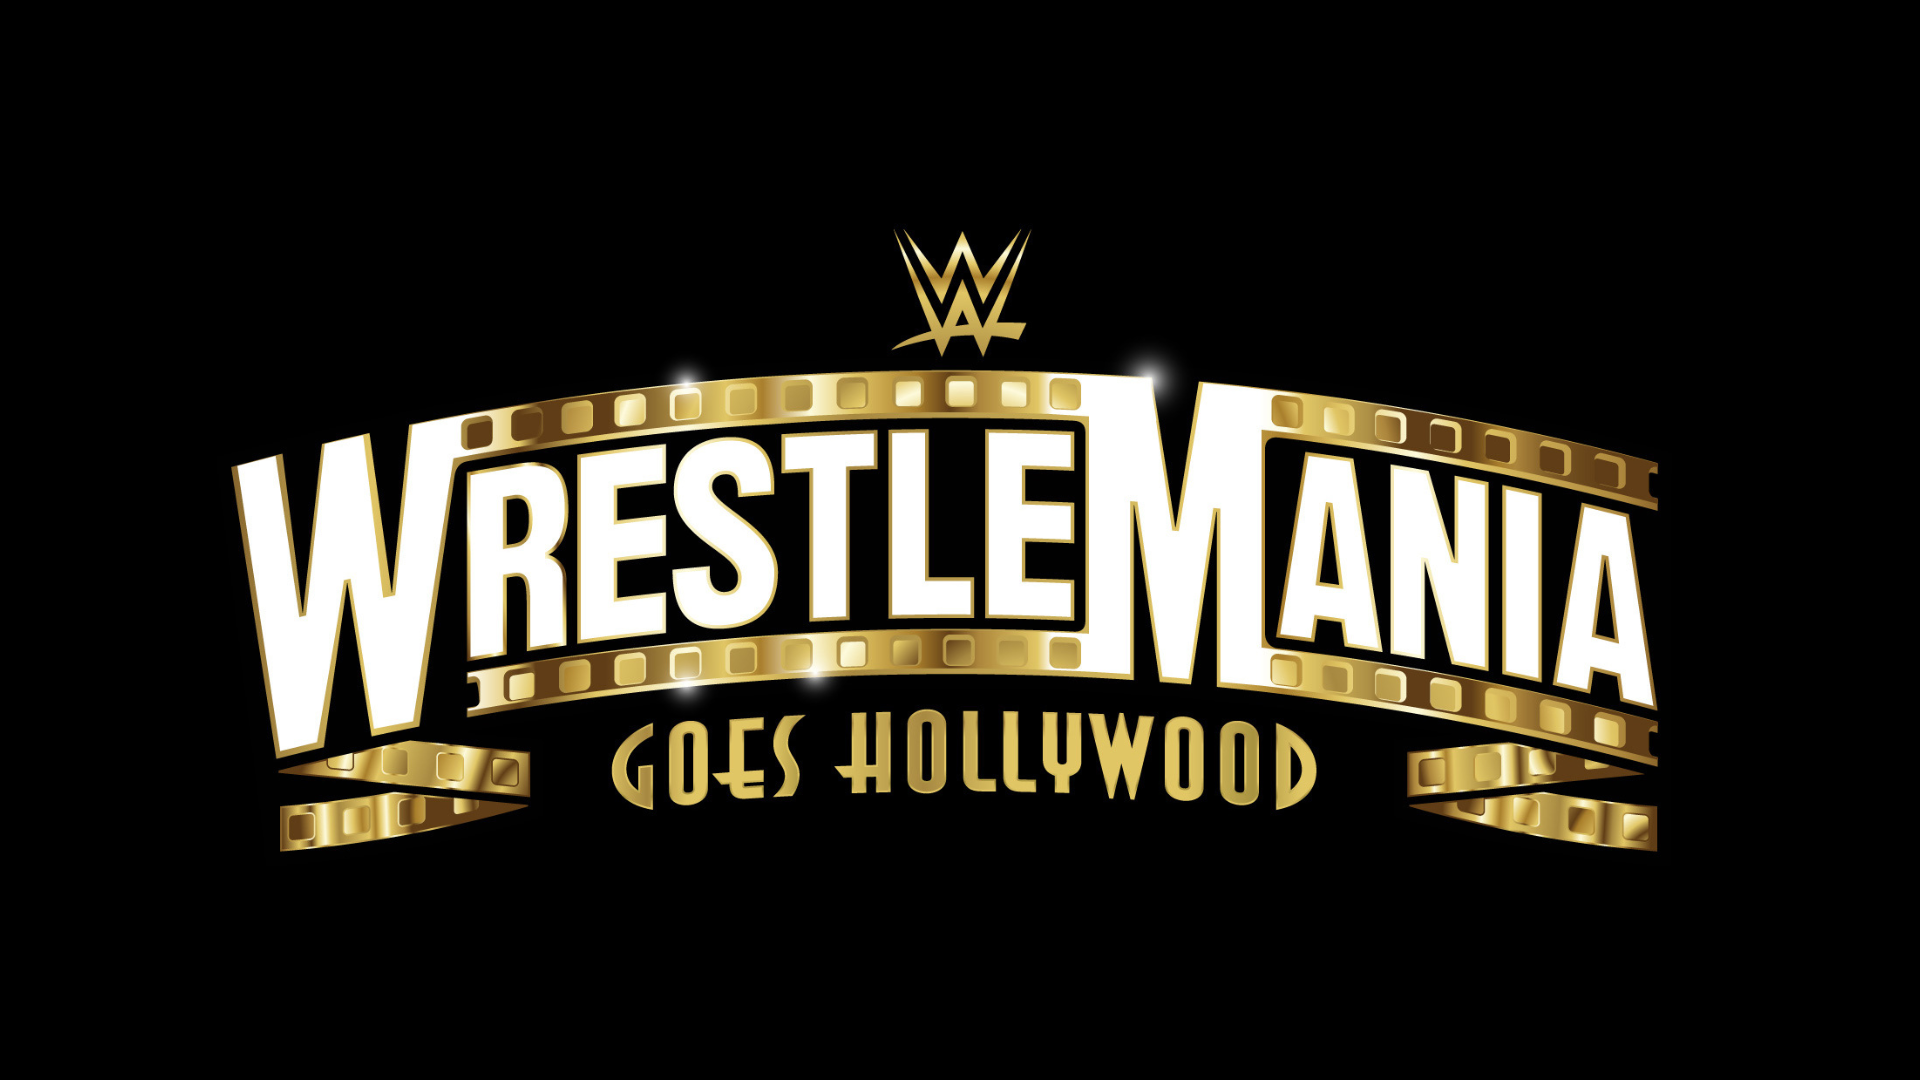 WWE sets record gate for WrestleMania